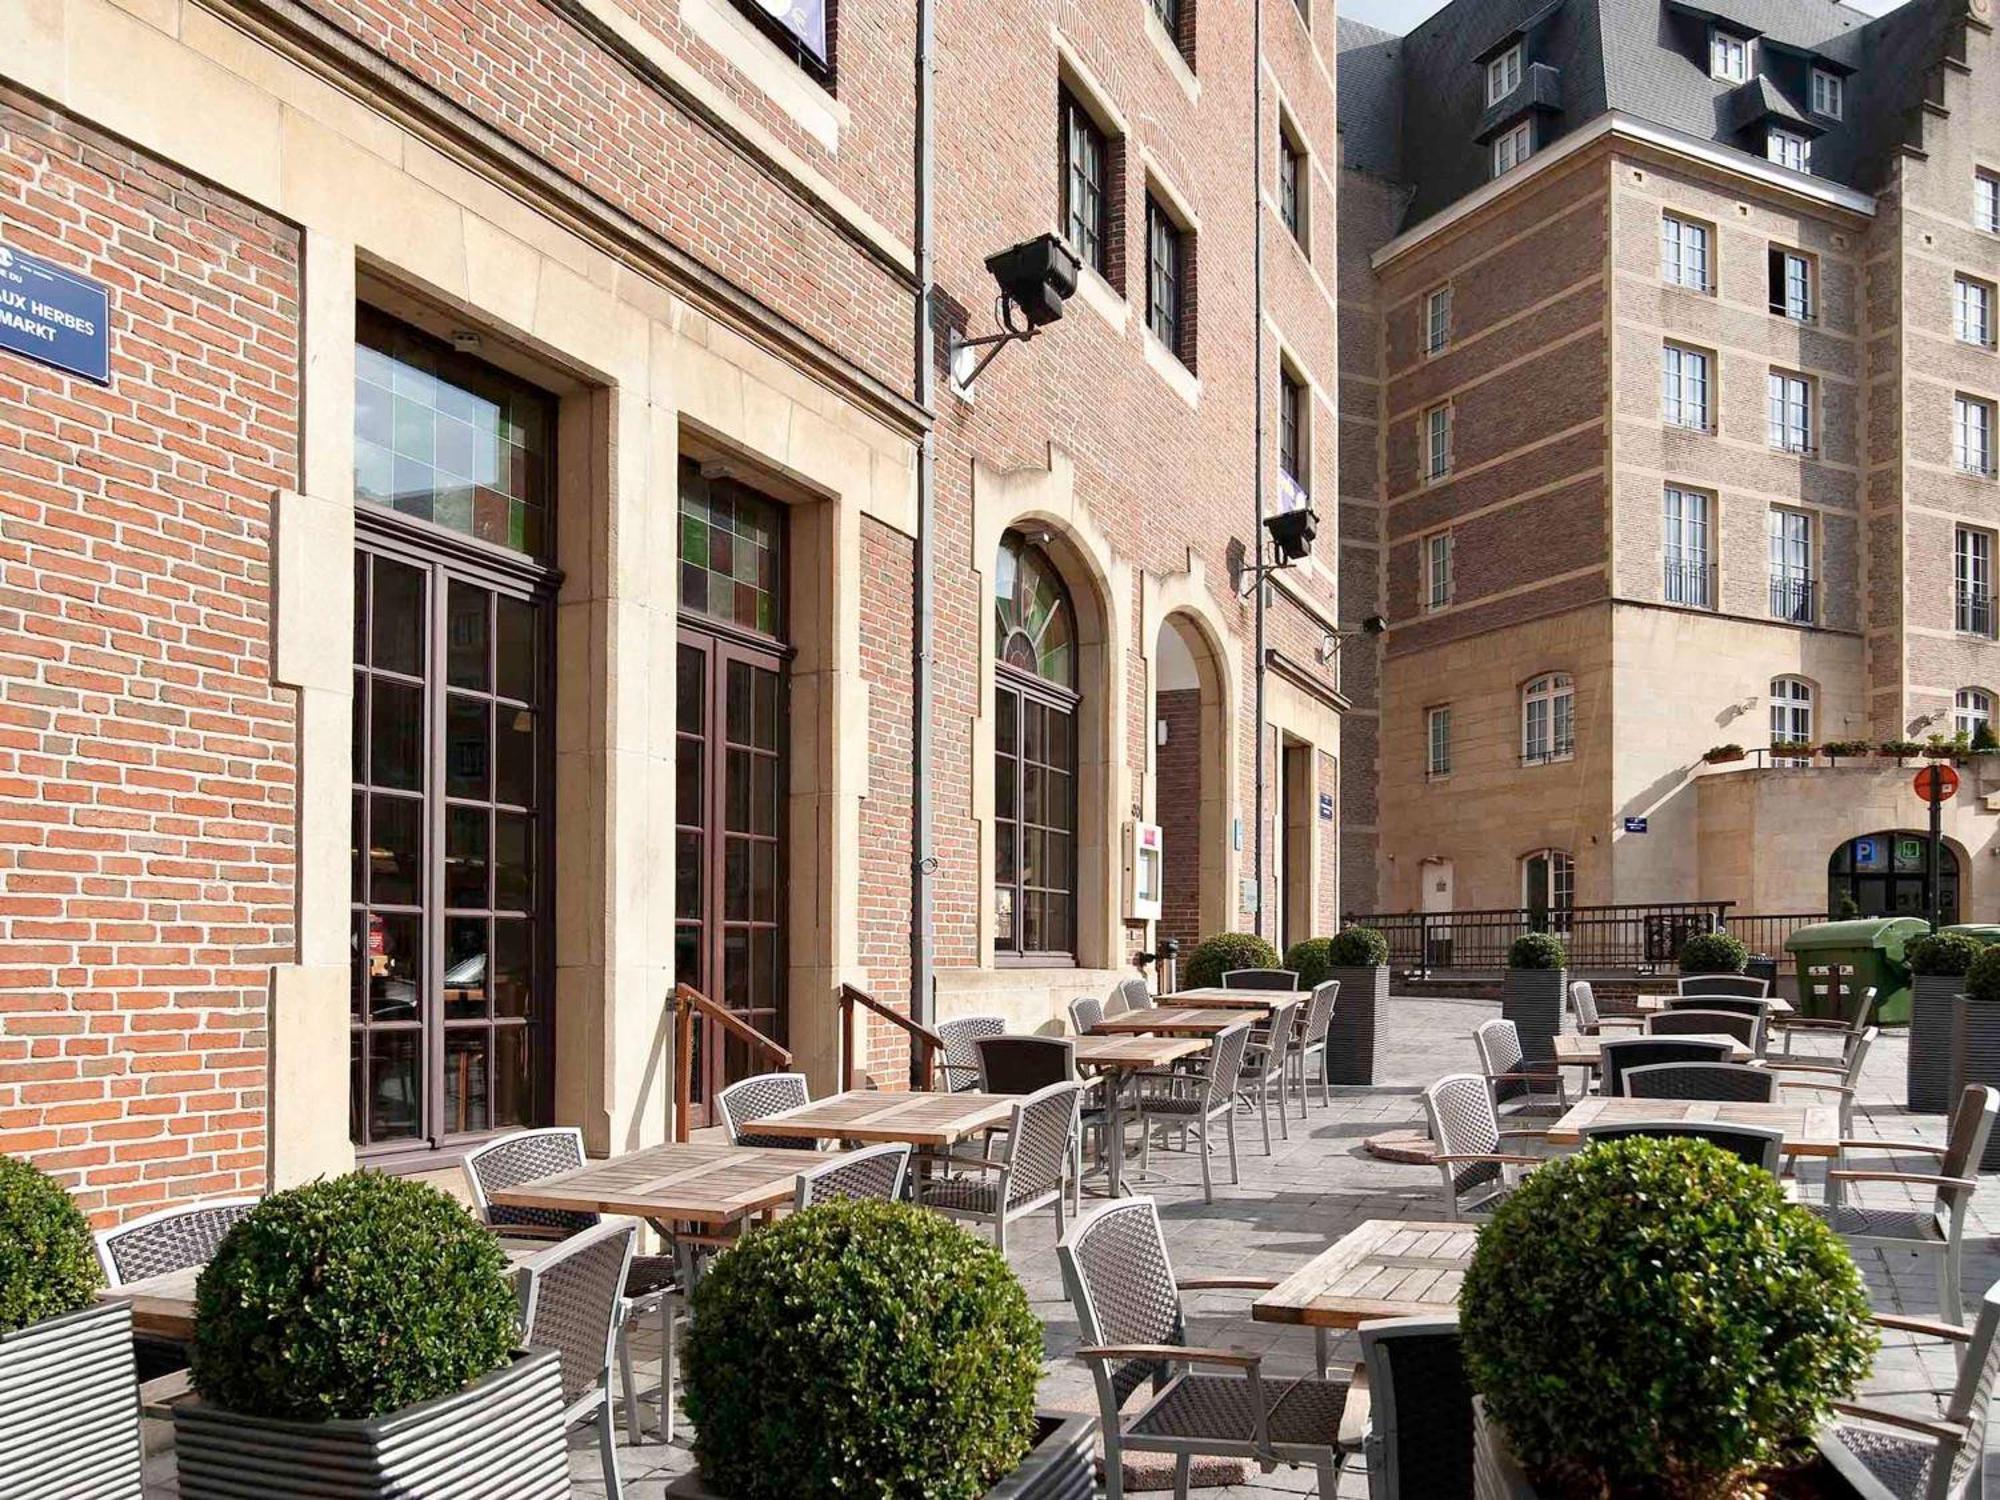 Ibis Hotel Brussels Off Grand'Place Exterior photo